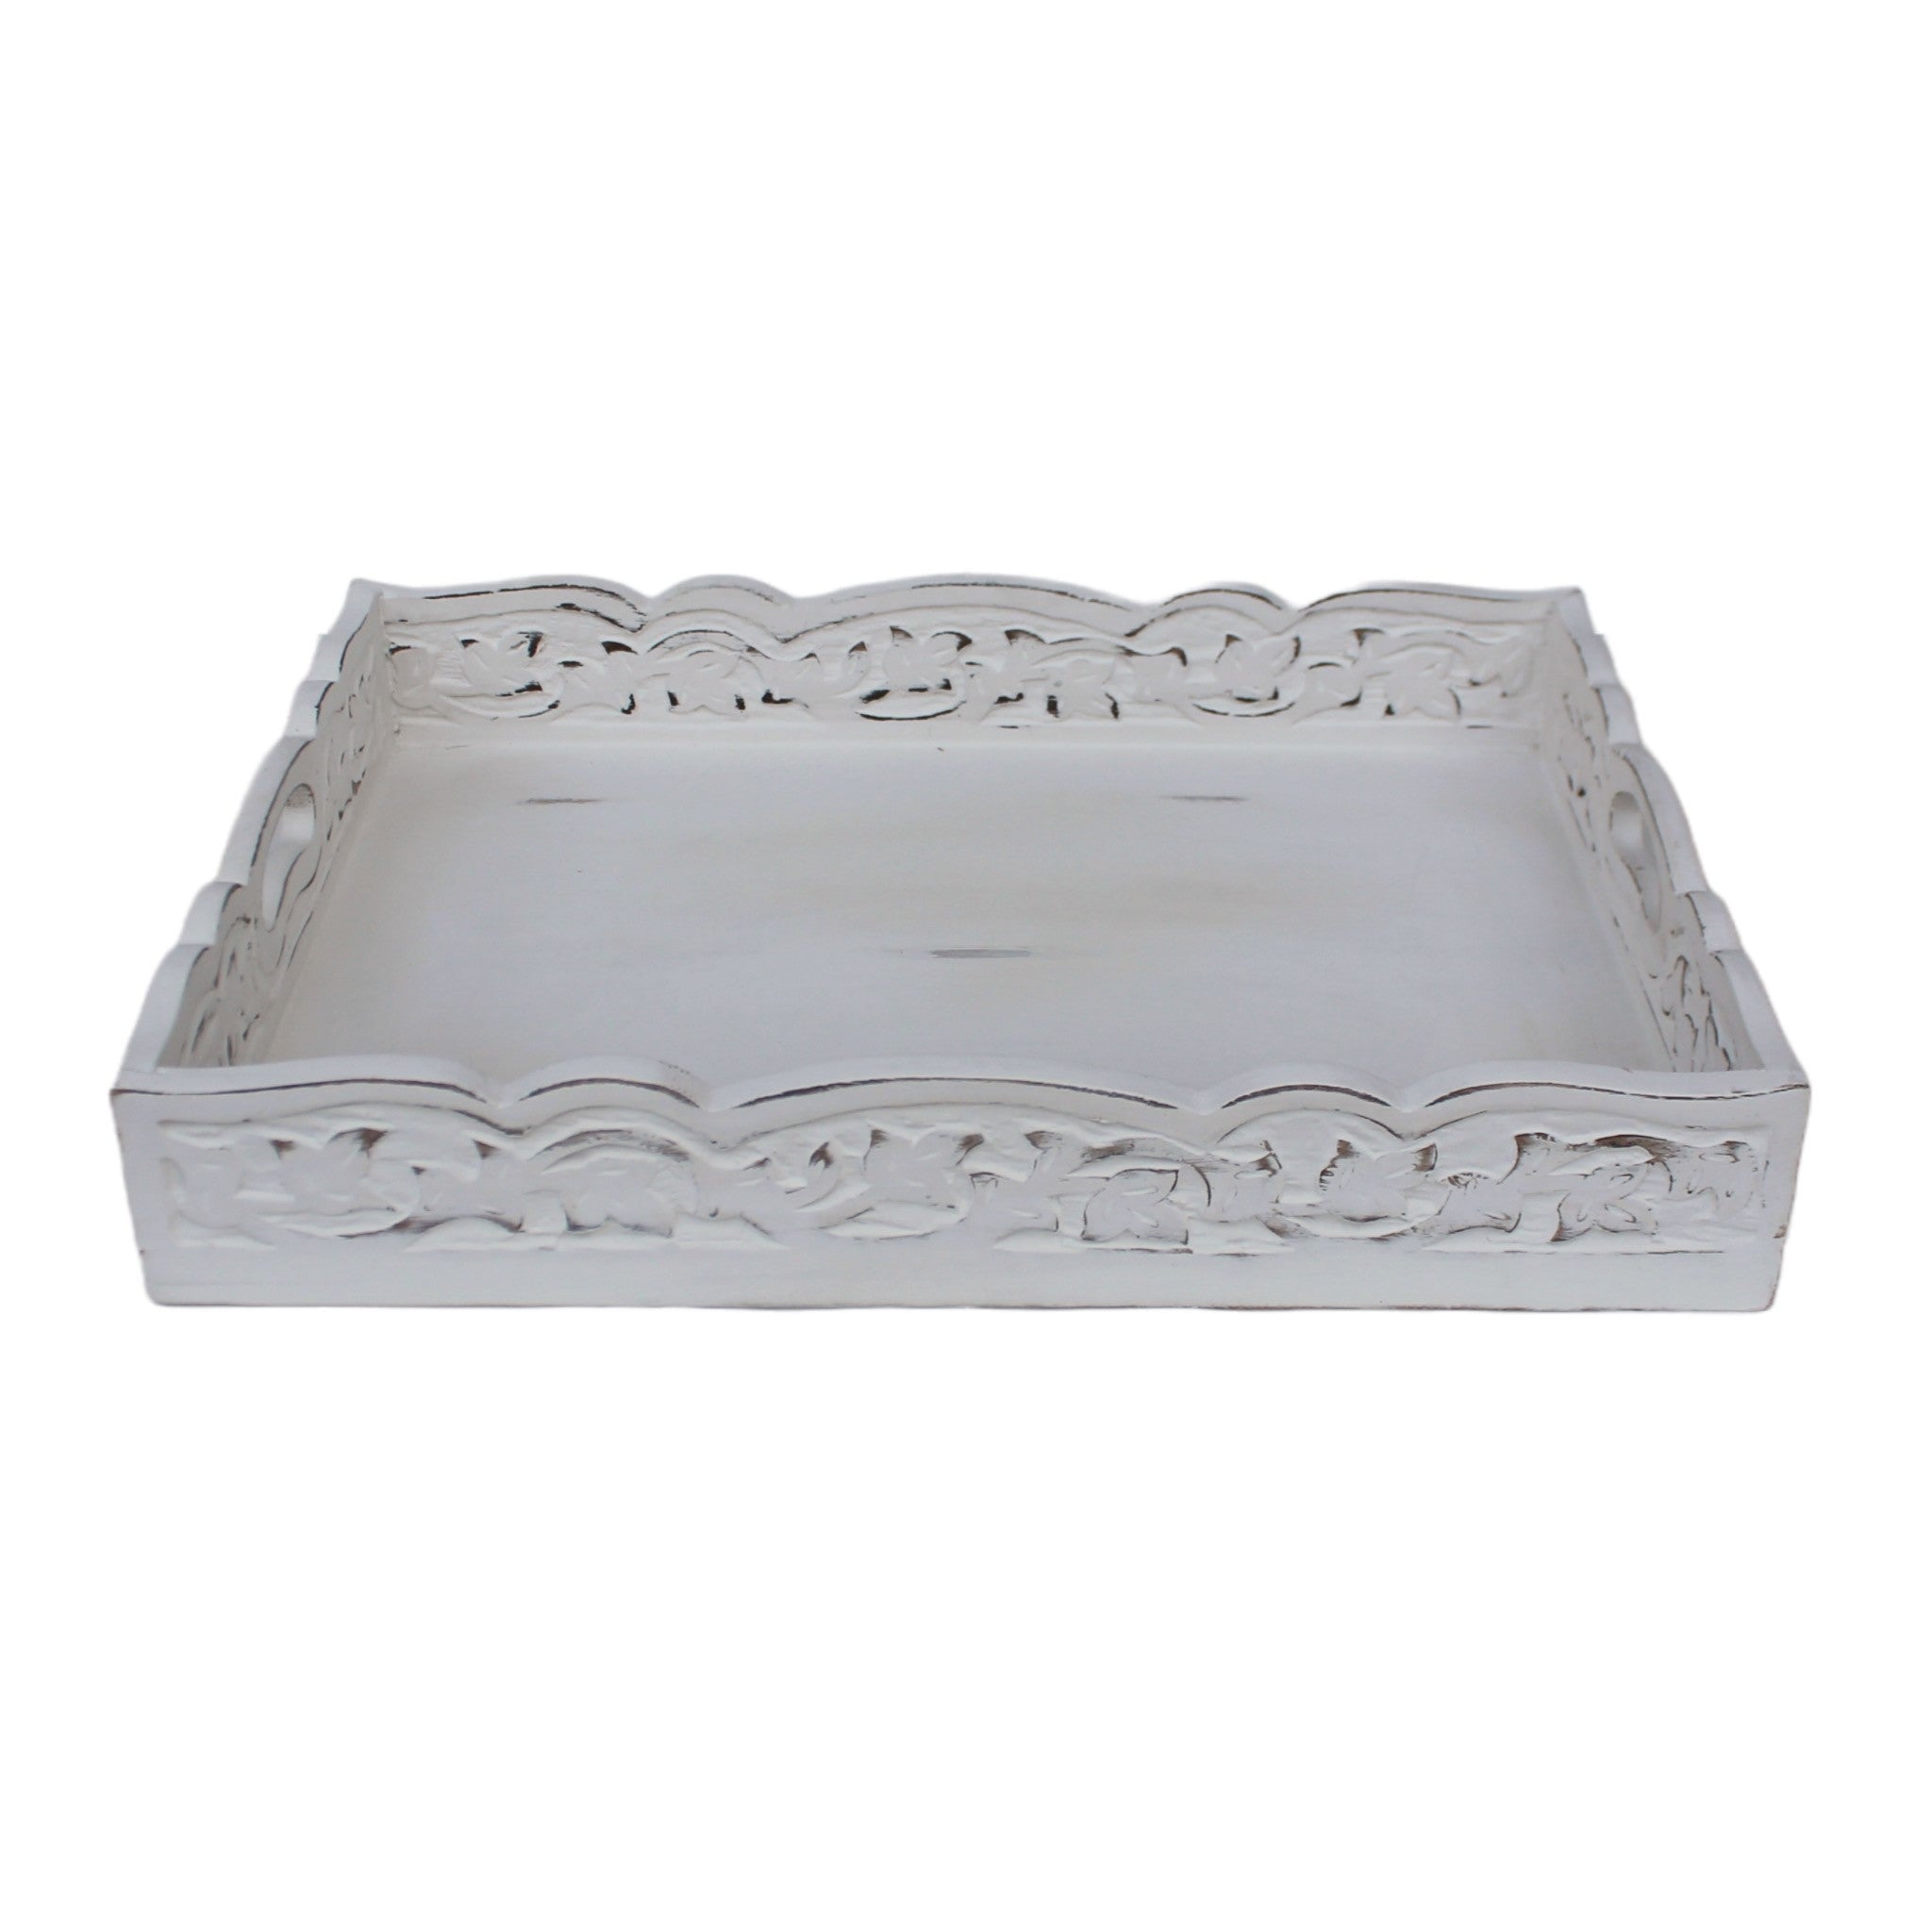 Carved Serving Tray in White